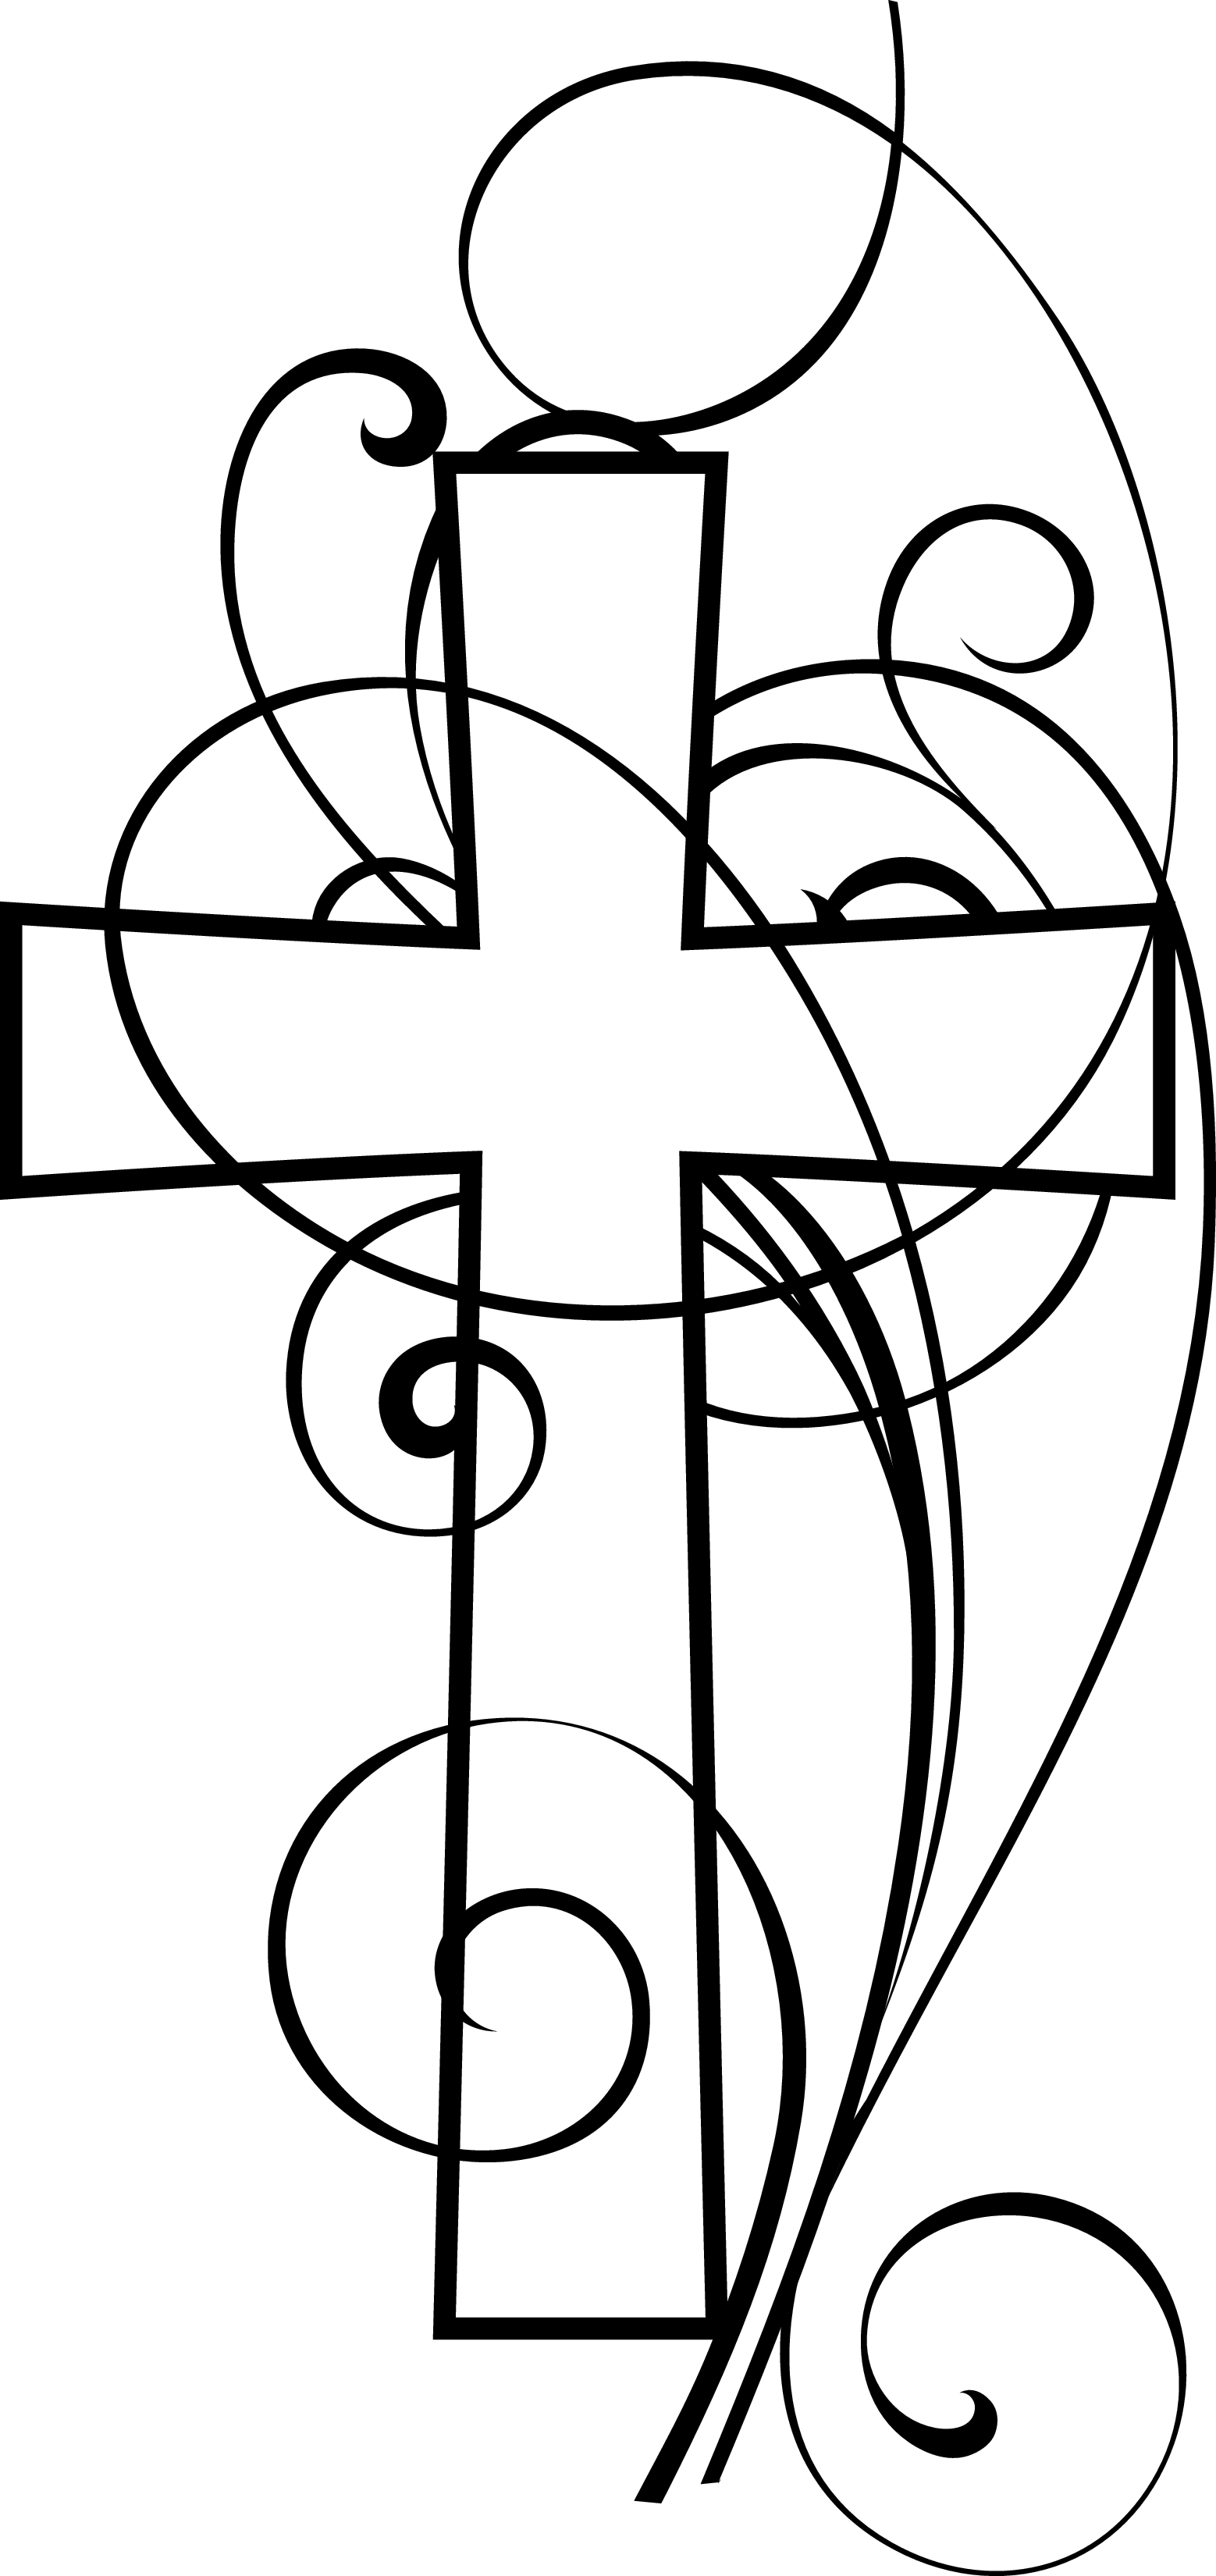 Catholic Borders Free Download Clipart